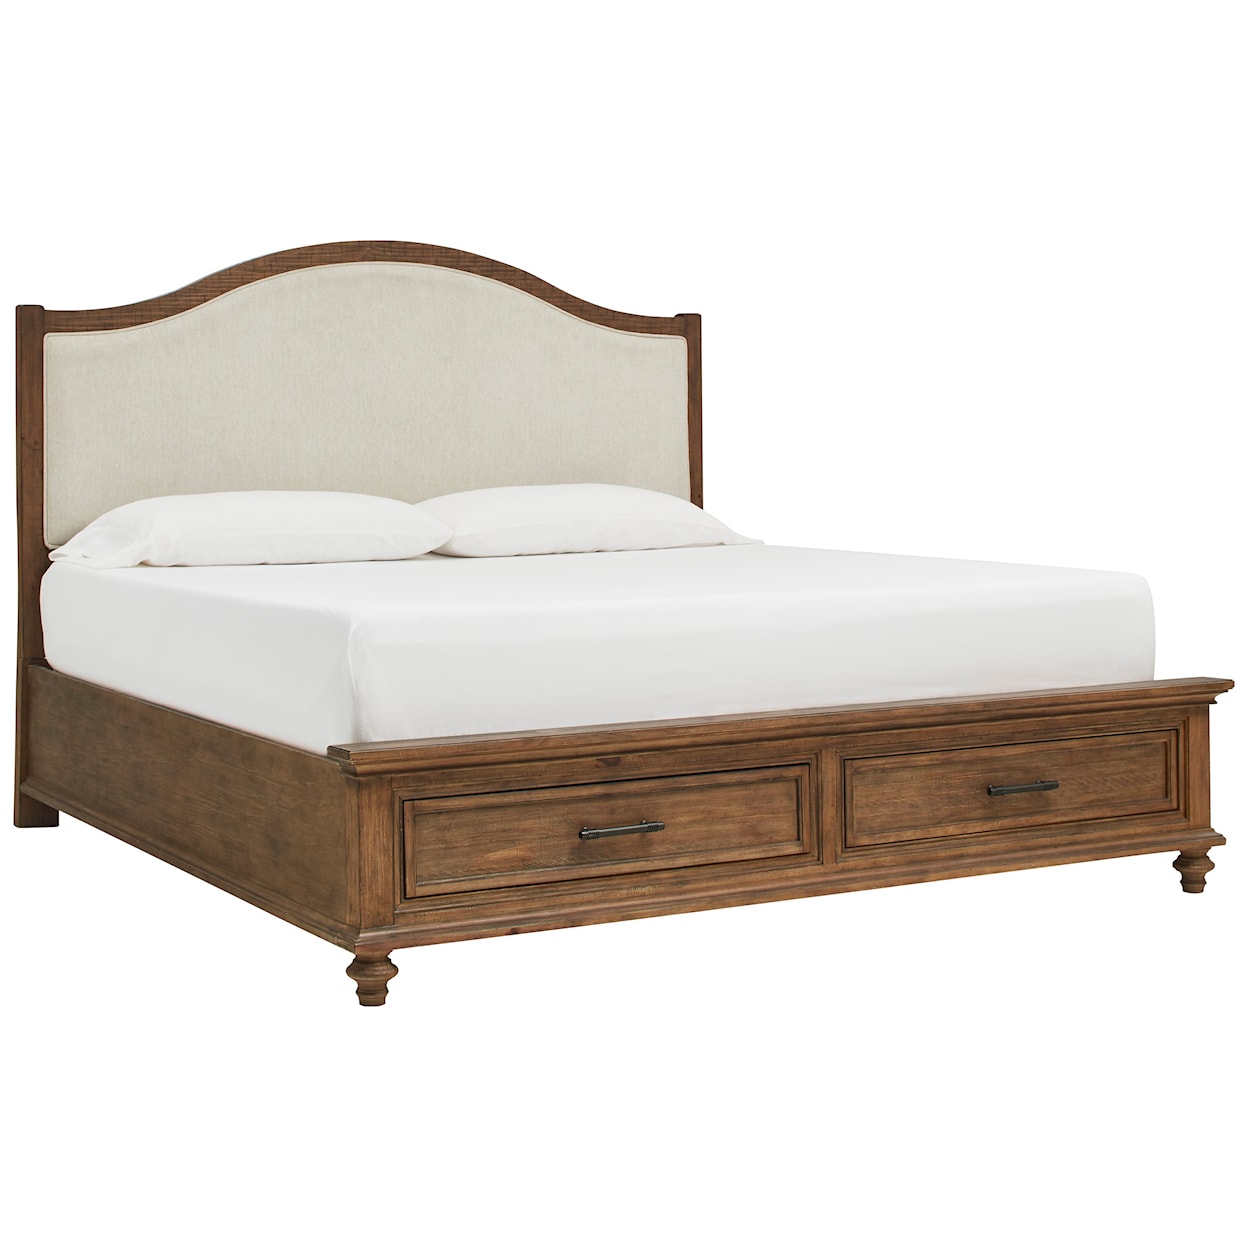 Aspenhome Hensley King Arched Panel Bed